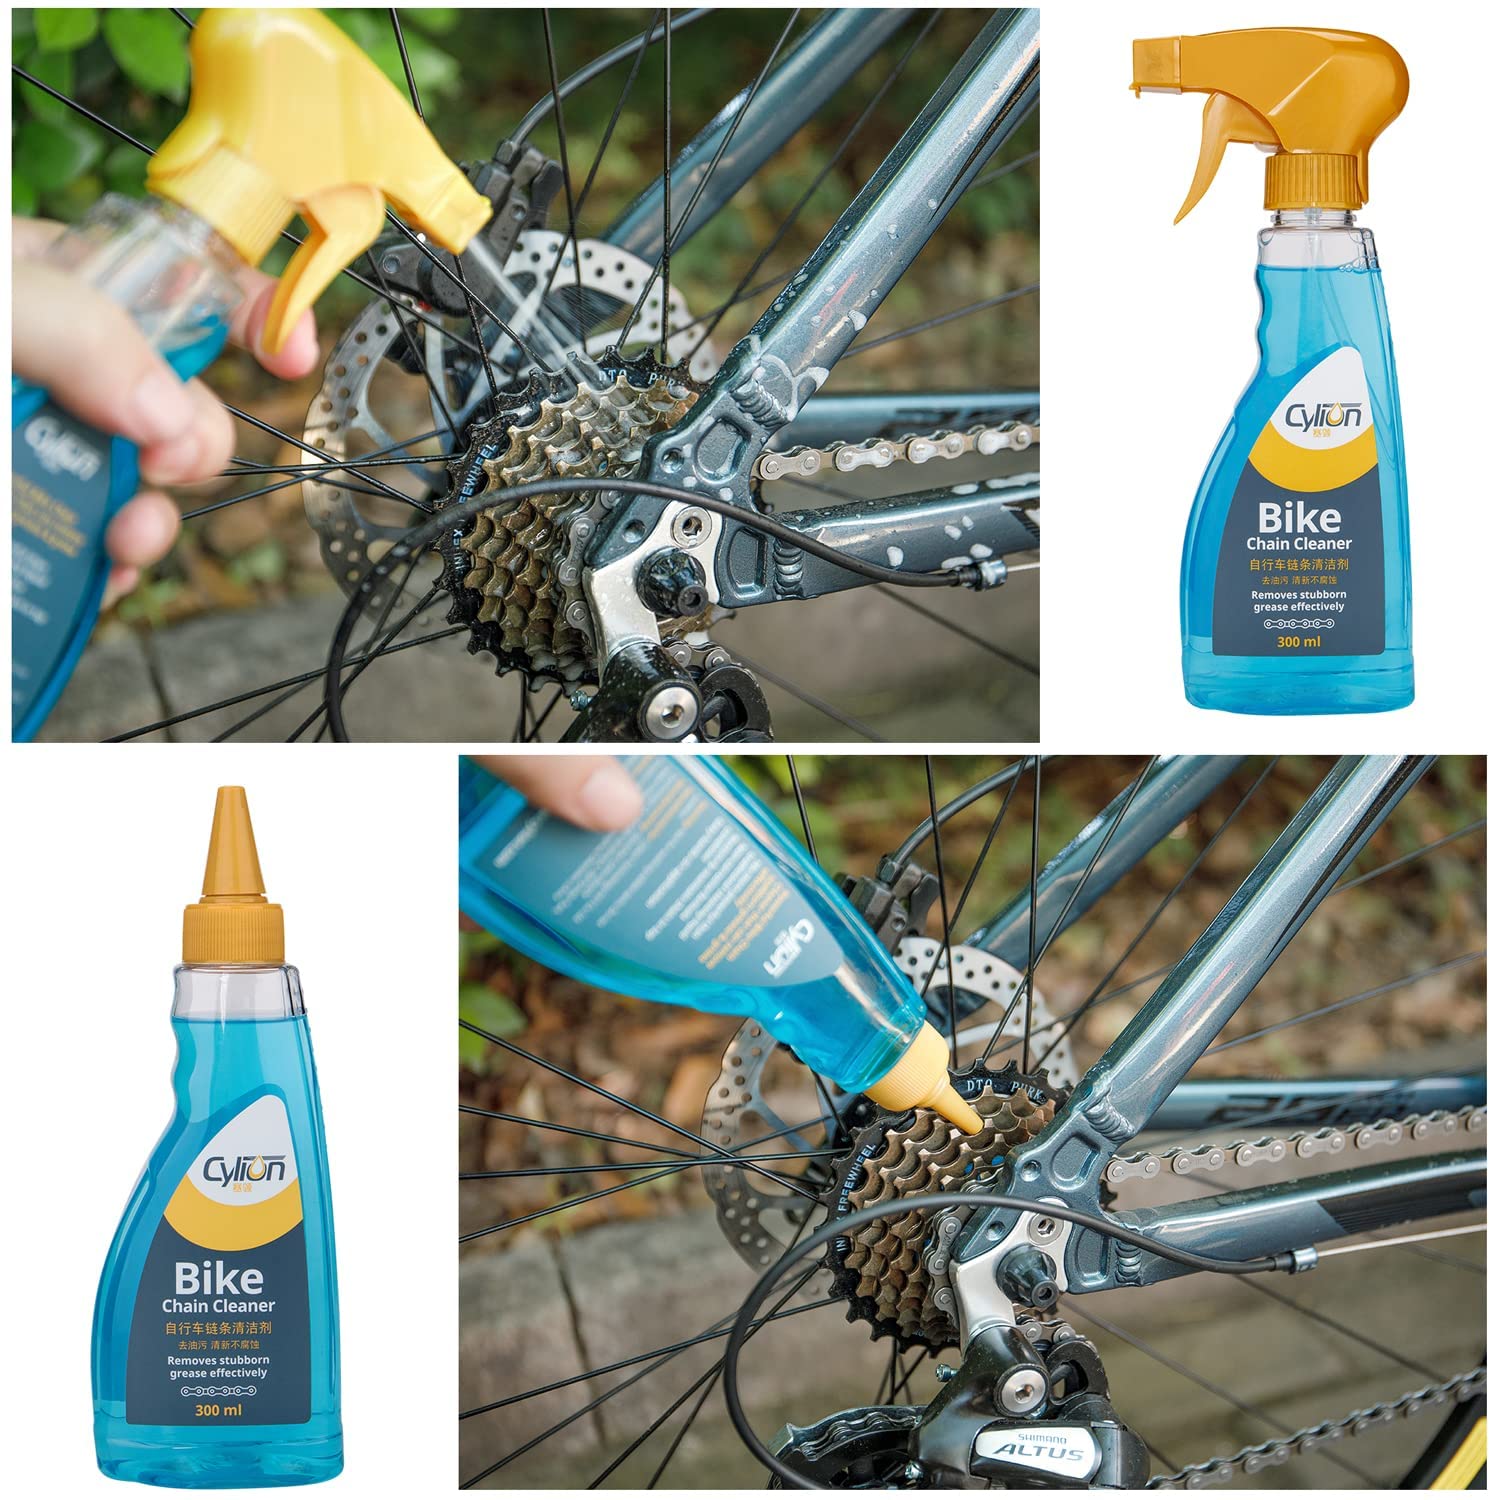 Once the rear wheel has been removed clean the chainstay and the rest of the drivetrain using a bike cleaning kit like this.